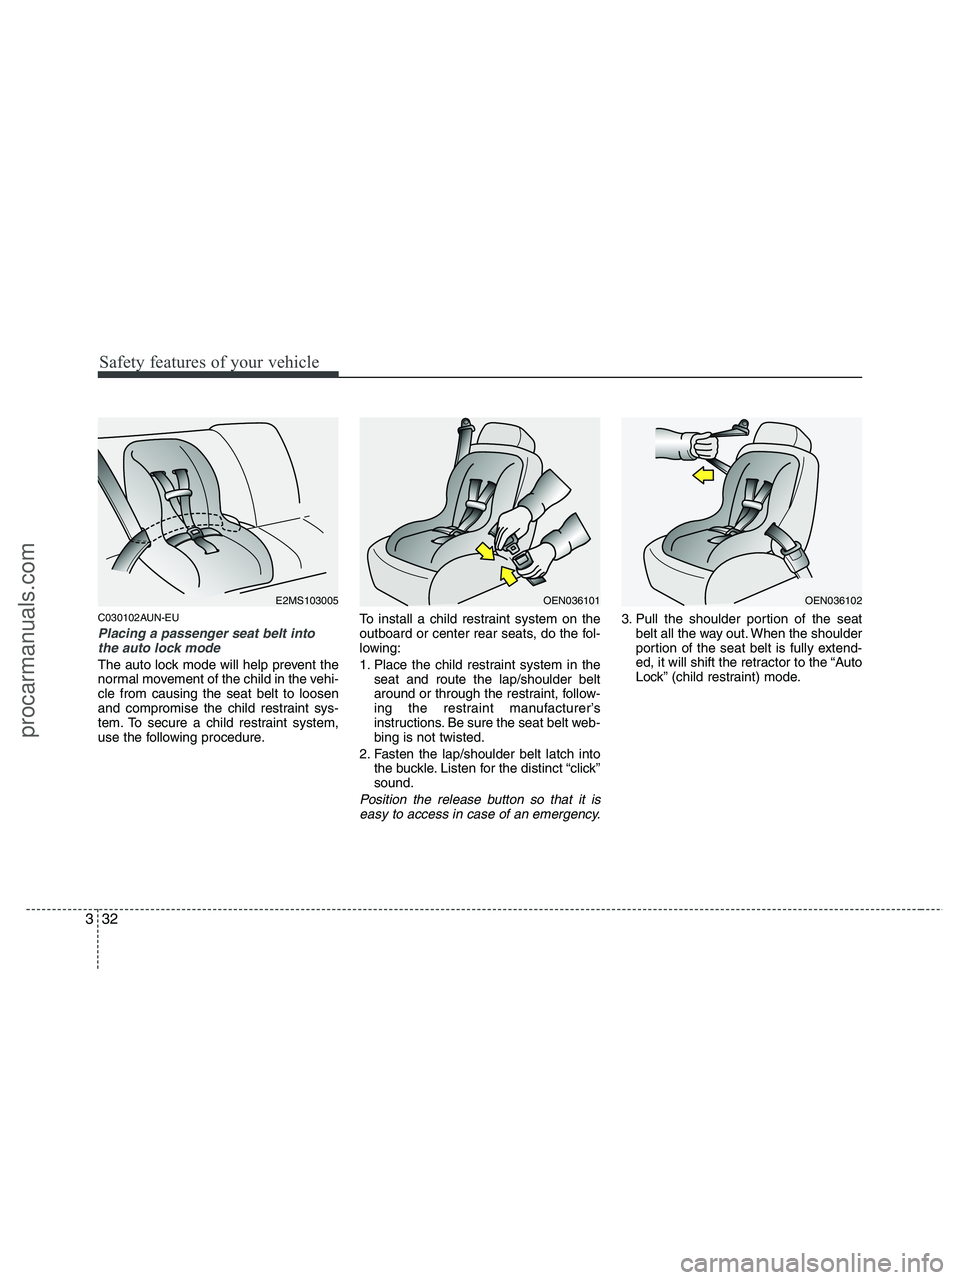 HYUNDAI VERACRUZ 2010  Owners Manual Safety features of your vehicle
32 3
C030102AUN-EU
Placing a passenger seat belt into
the auto lock mode 
The auto lock mode will help prevent the
normal movement of the child in the vehi-
cle from ca